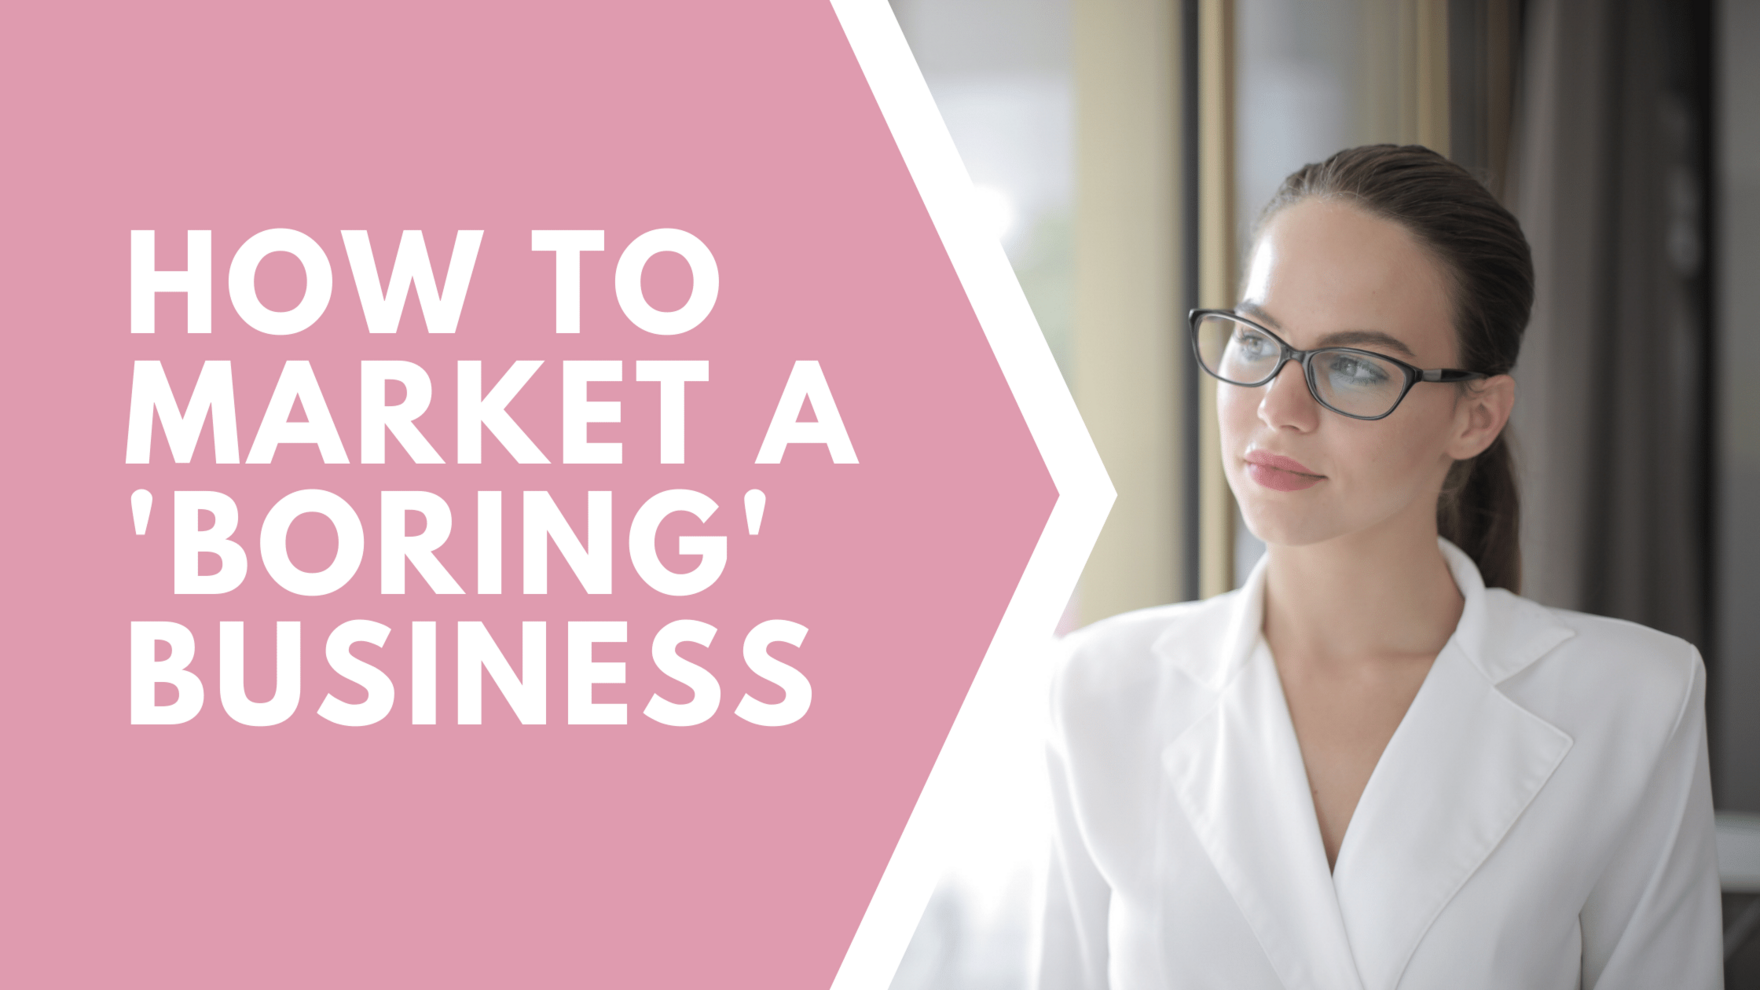 HOW TO MARKET A 'BORING' BUSINESS